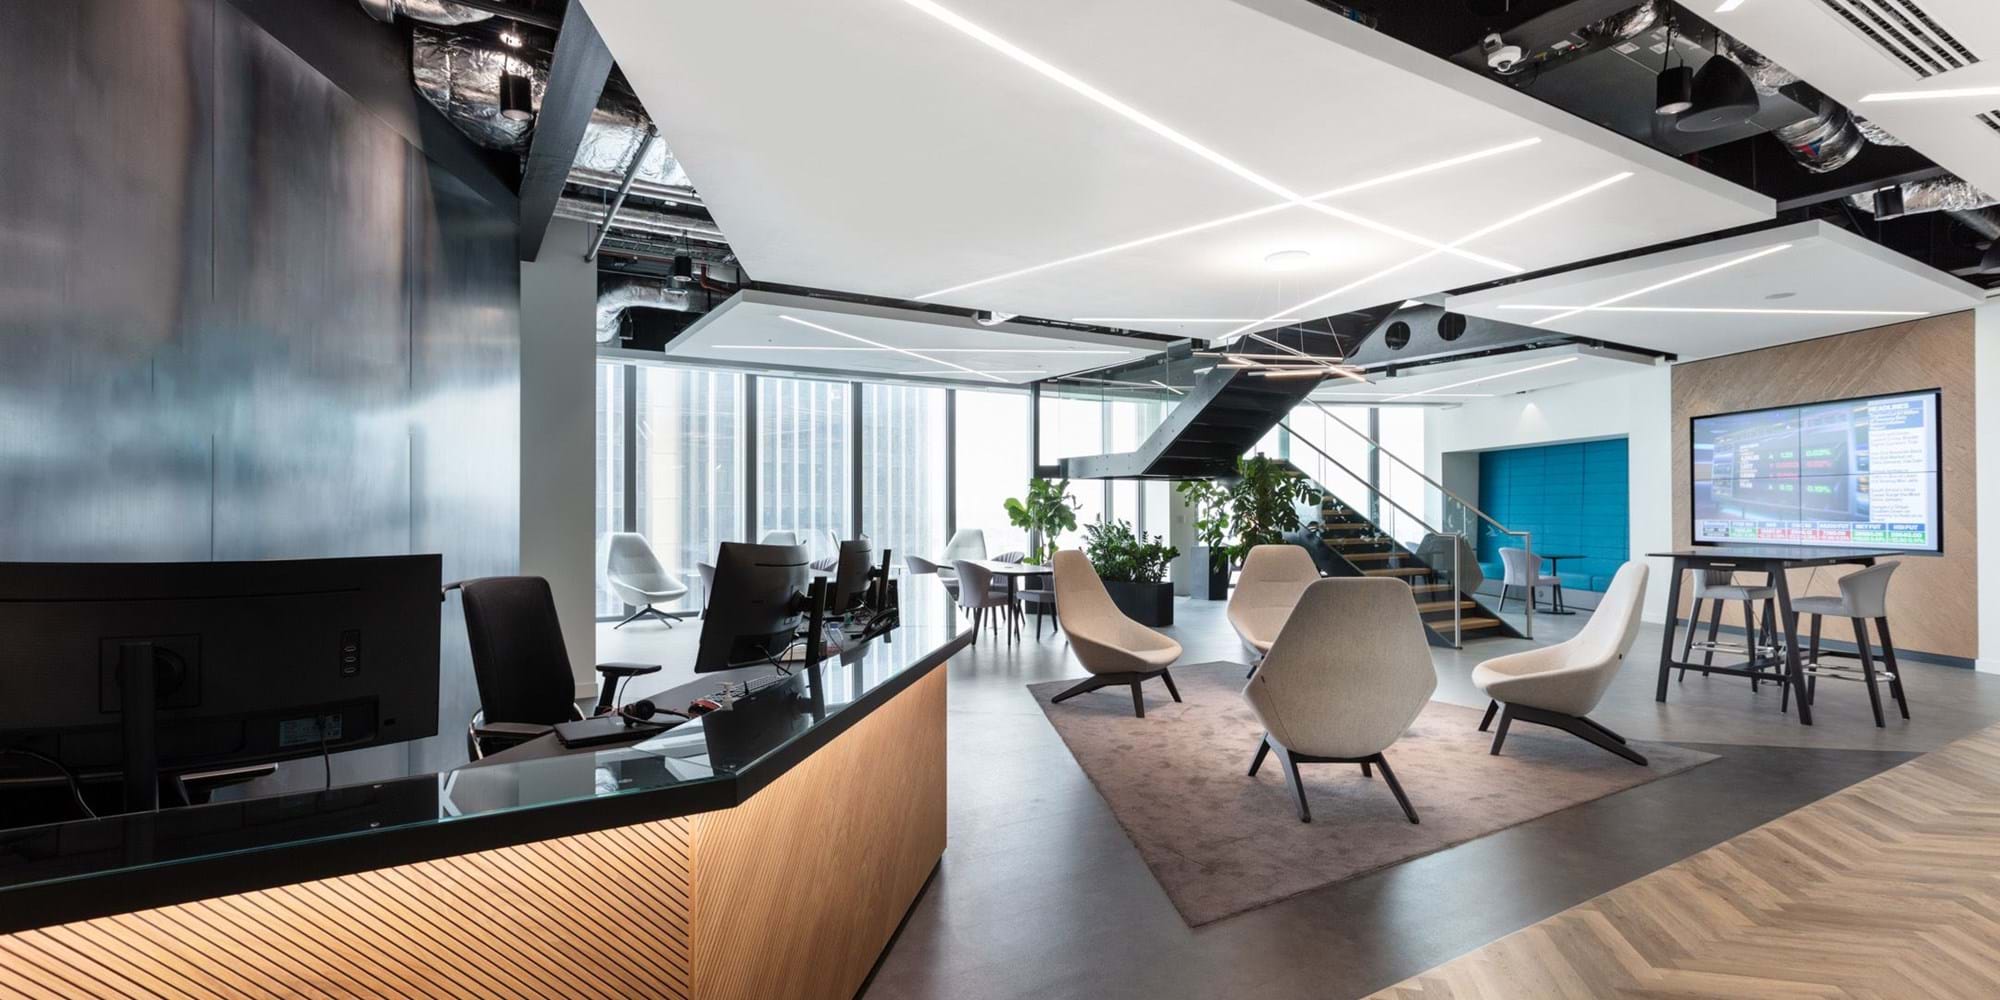 Modus Workspace office design, fit out and refurbishment - Insurance and Risk Management Firm - Modus_Verisk-21.jpg